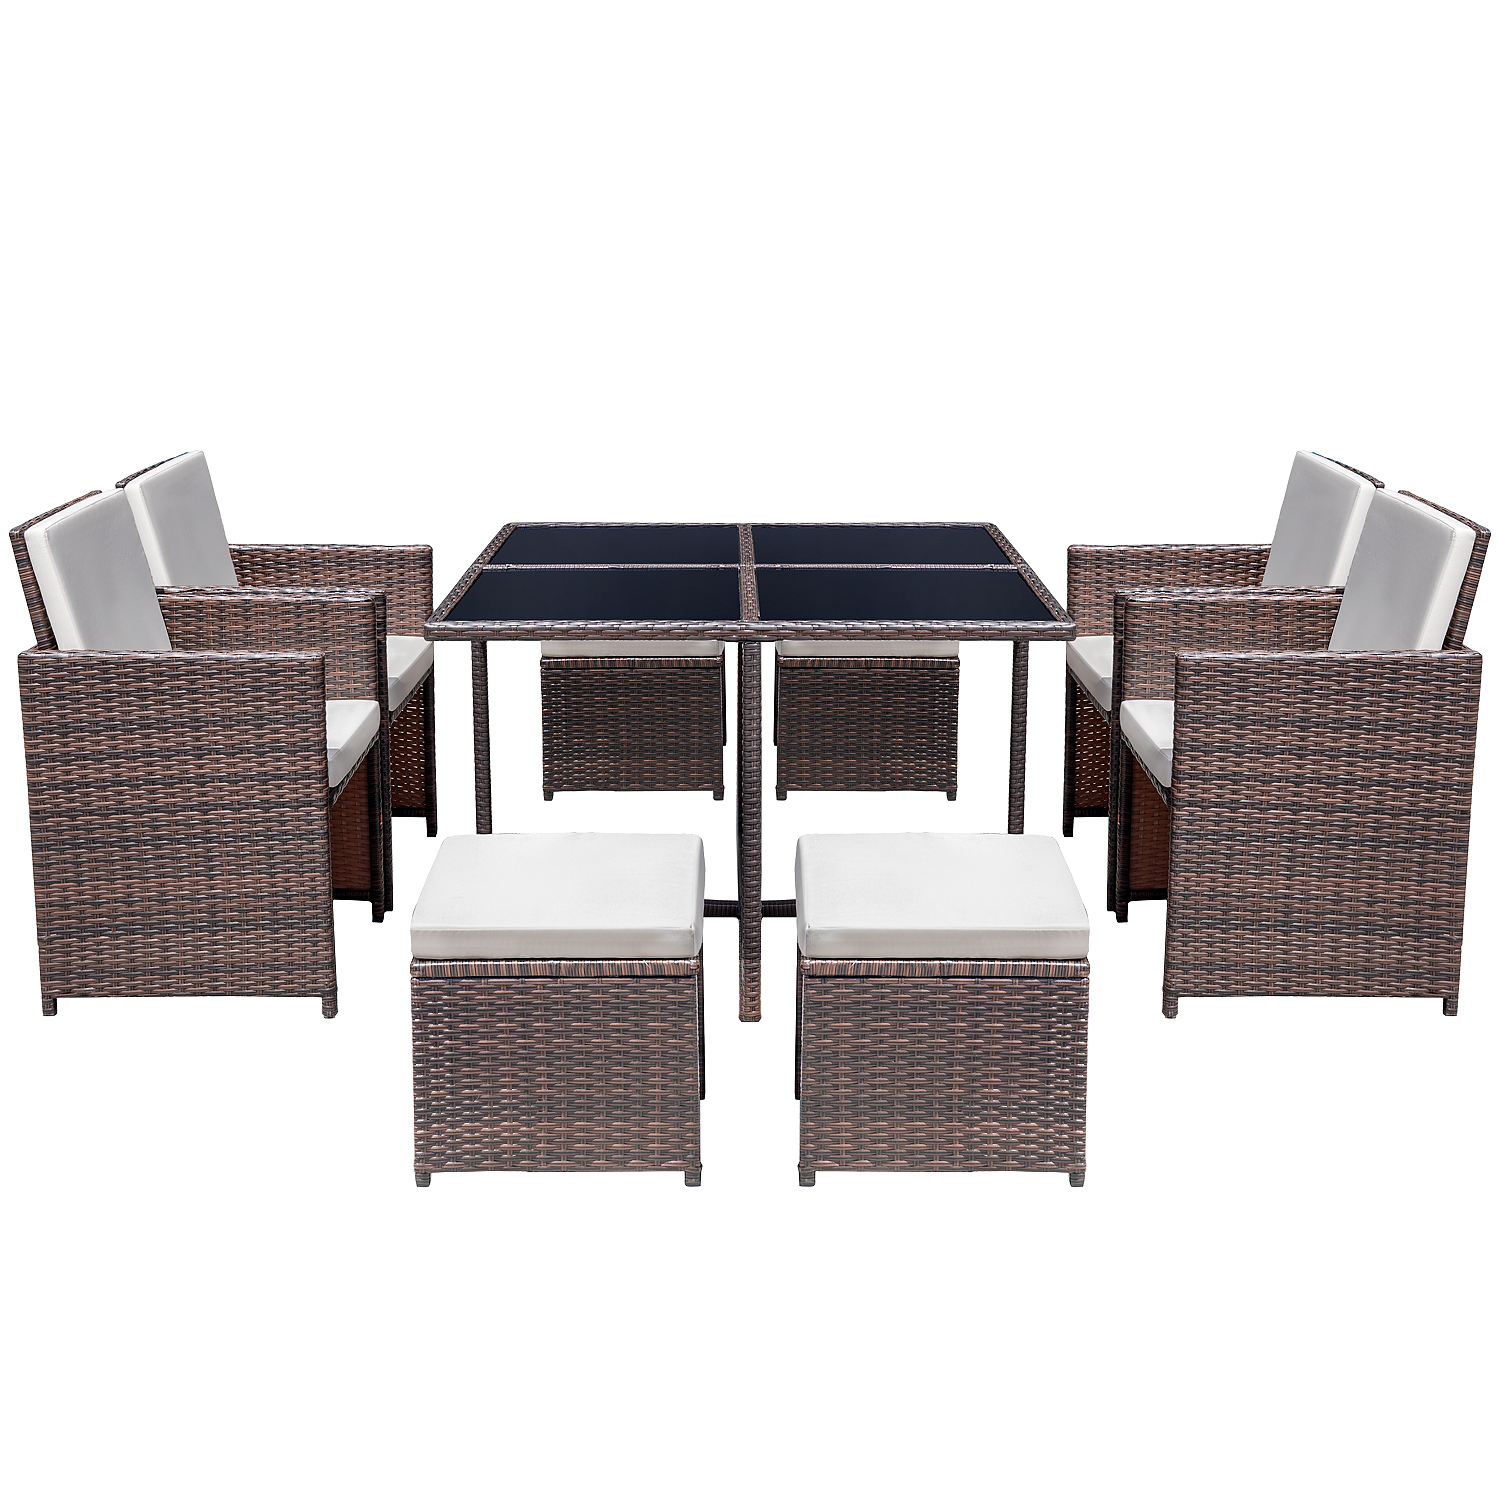 Lacoo 9 Pieces Patio Dining Sets Tempered Glass Table Cushioned Chairs with Ottoman 8 Seating Capacity, Beige - image 3 of 8